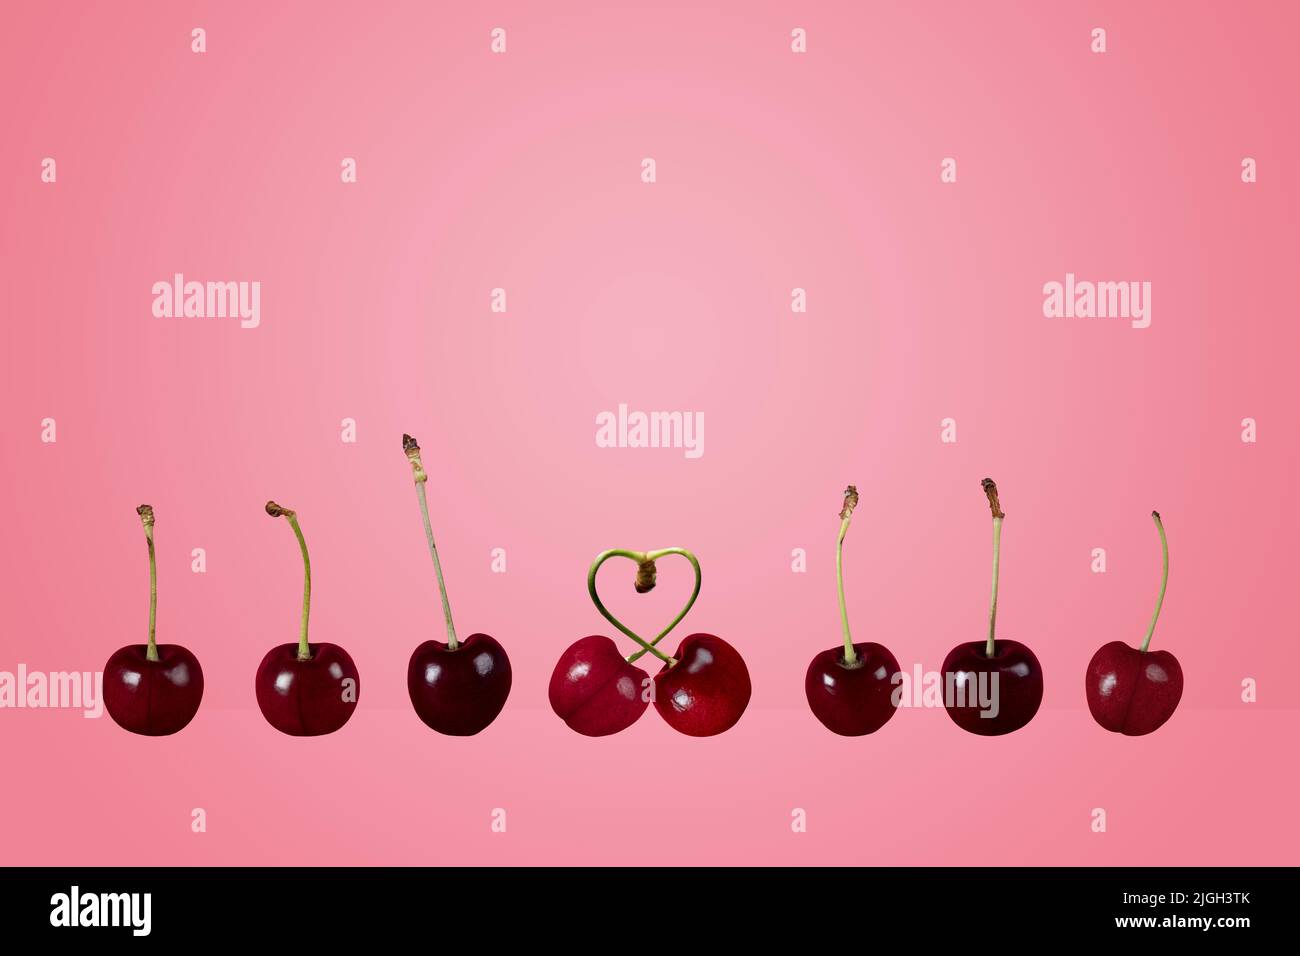 single couple singles couples concept row of ripe cherries pair heart cherries fruit on a colorful colourful peach pink background Stock Photo